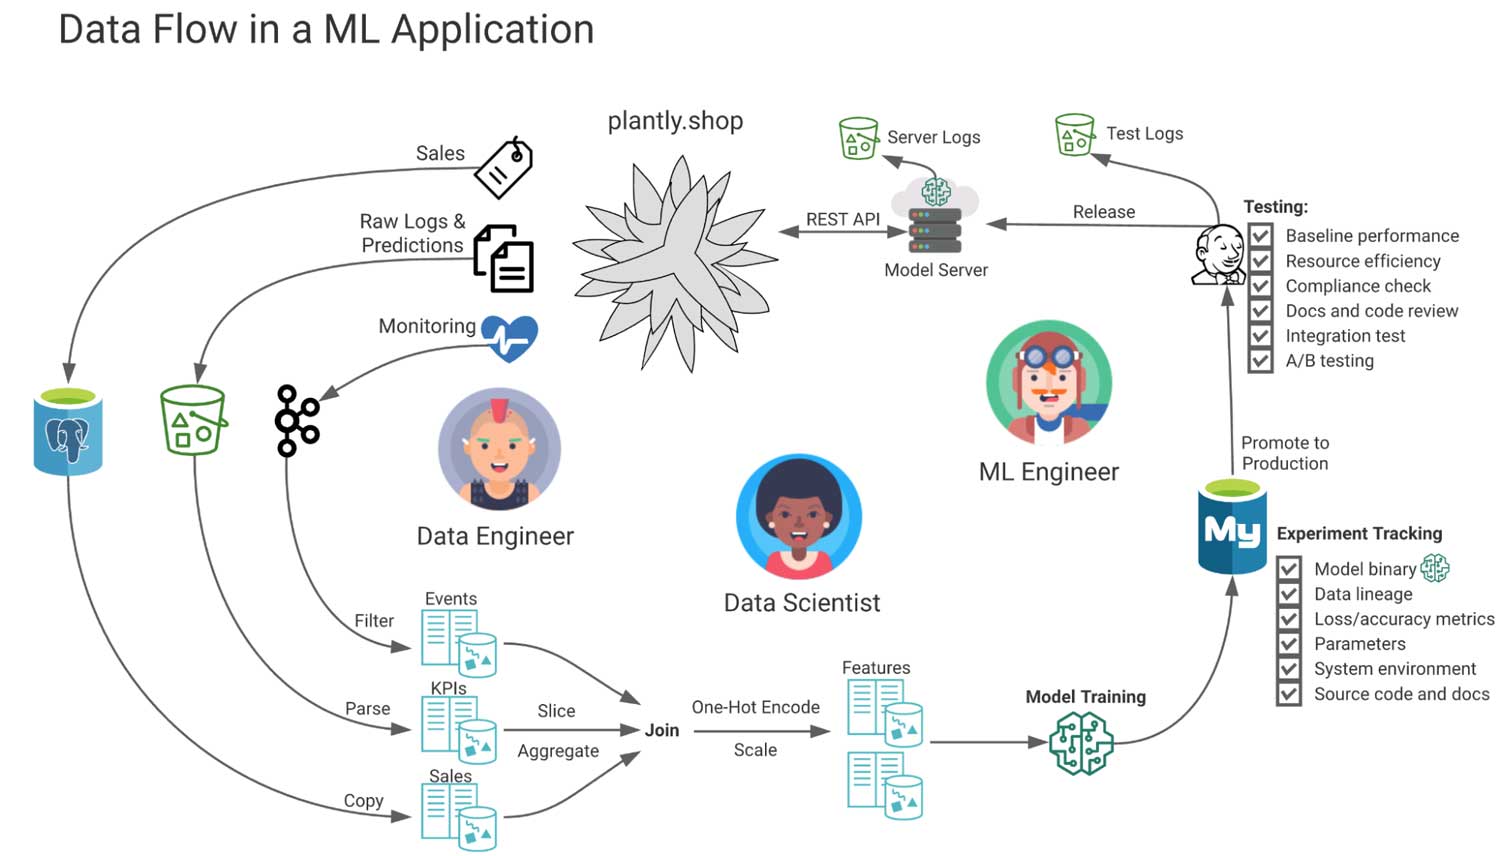 Flow of data flow for an ML application project built on Databricks Lakehouse.